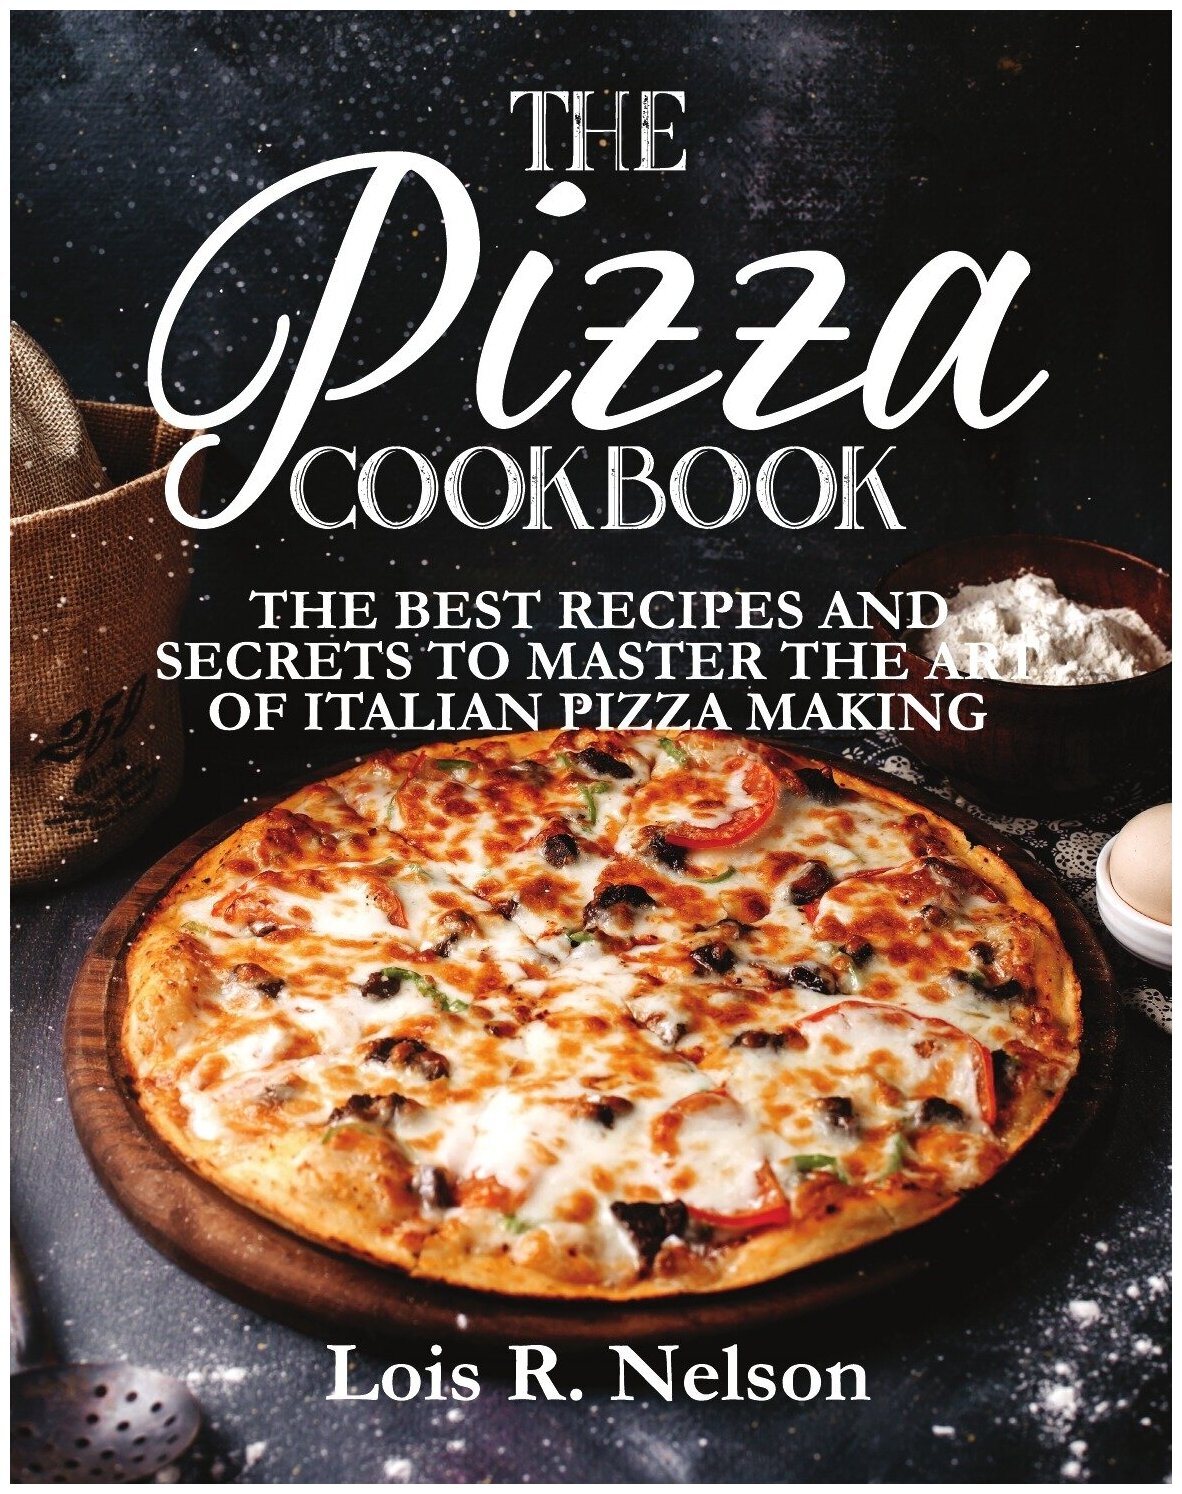 The Pizza Cookbook. The Best Recipes and Secrets to Master the Art of Italian Pizza Making